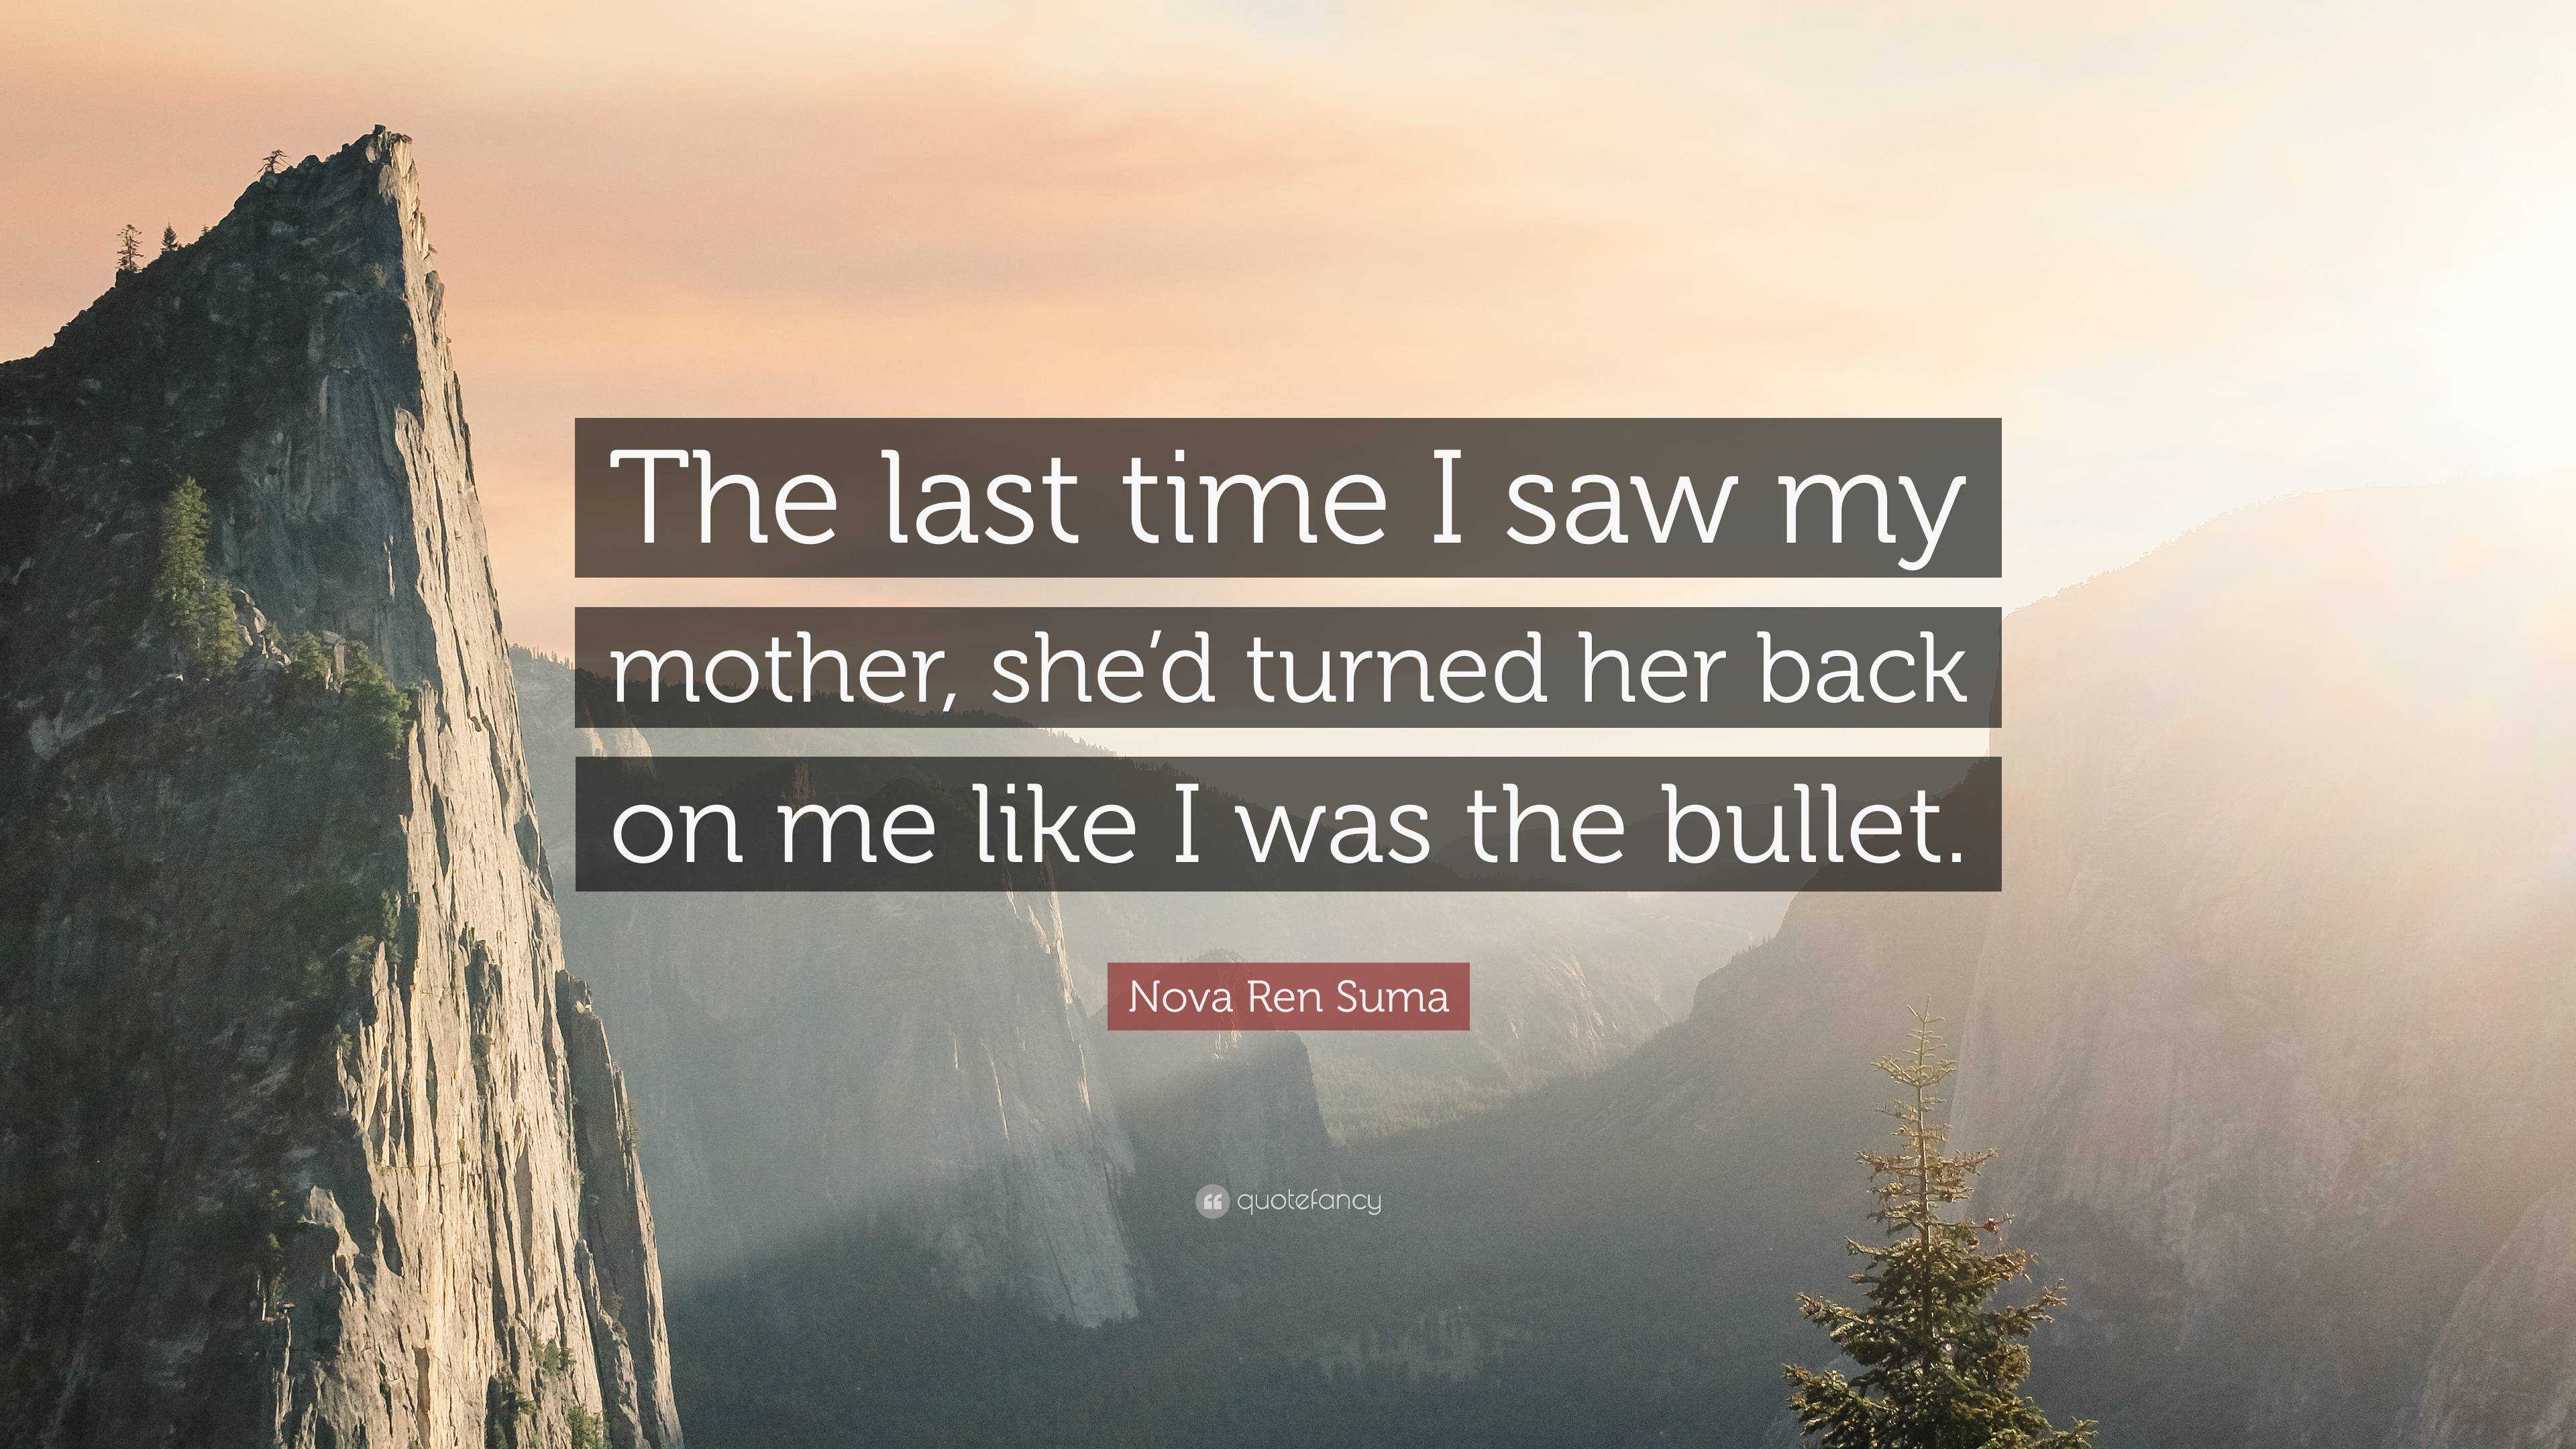 Nova Ren Suma Quote “the Last Time I Saw My Mother Shed Turned Her